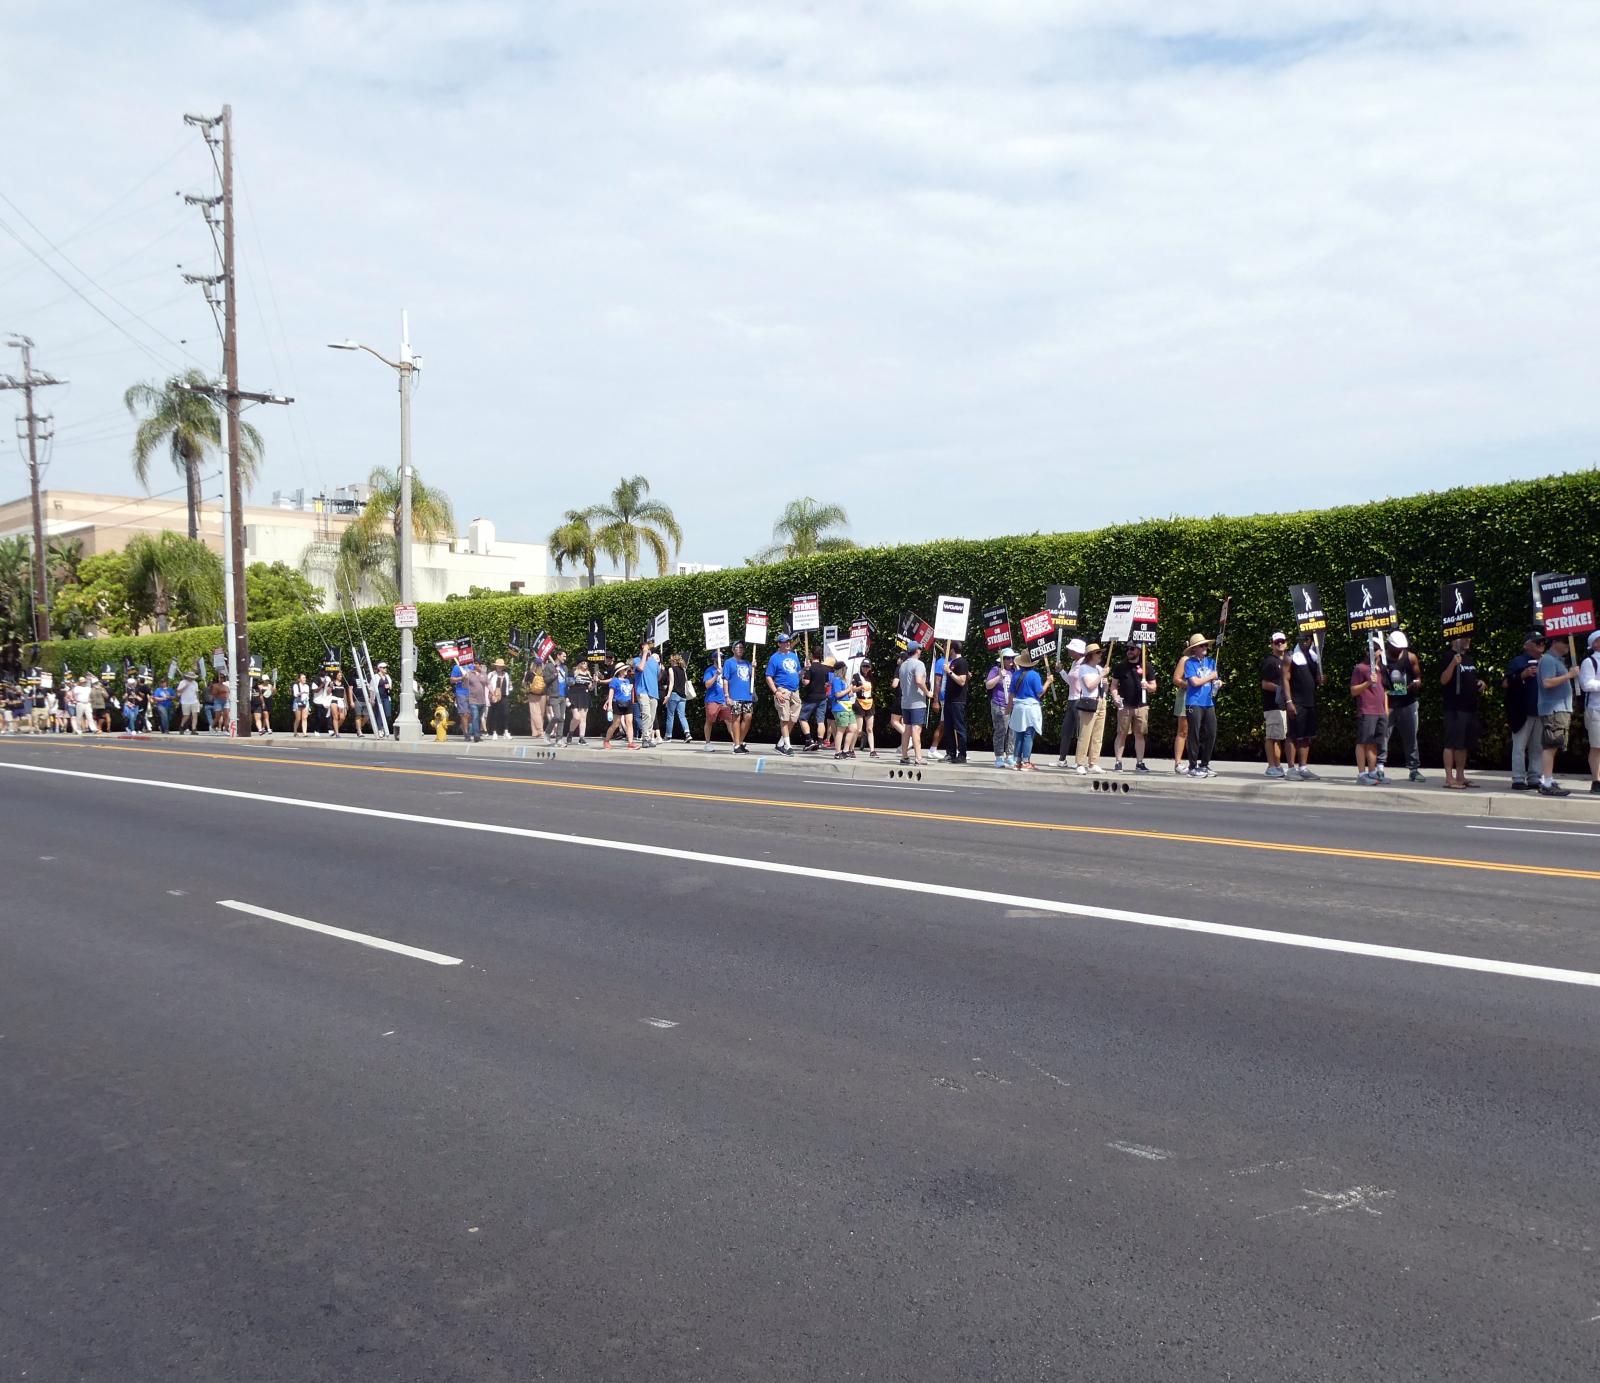 Lined Up At Paramount Studios | Buy this image